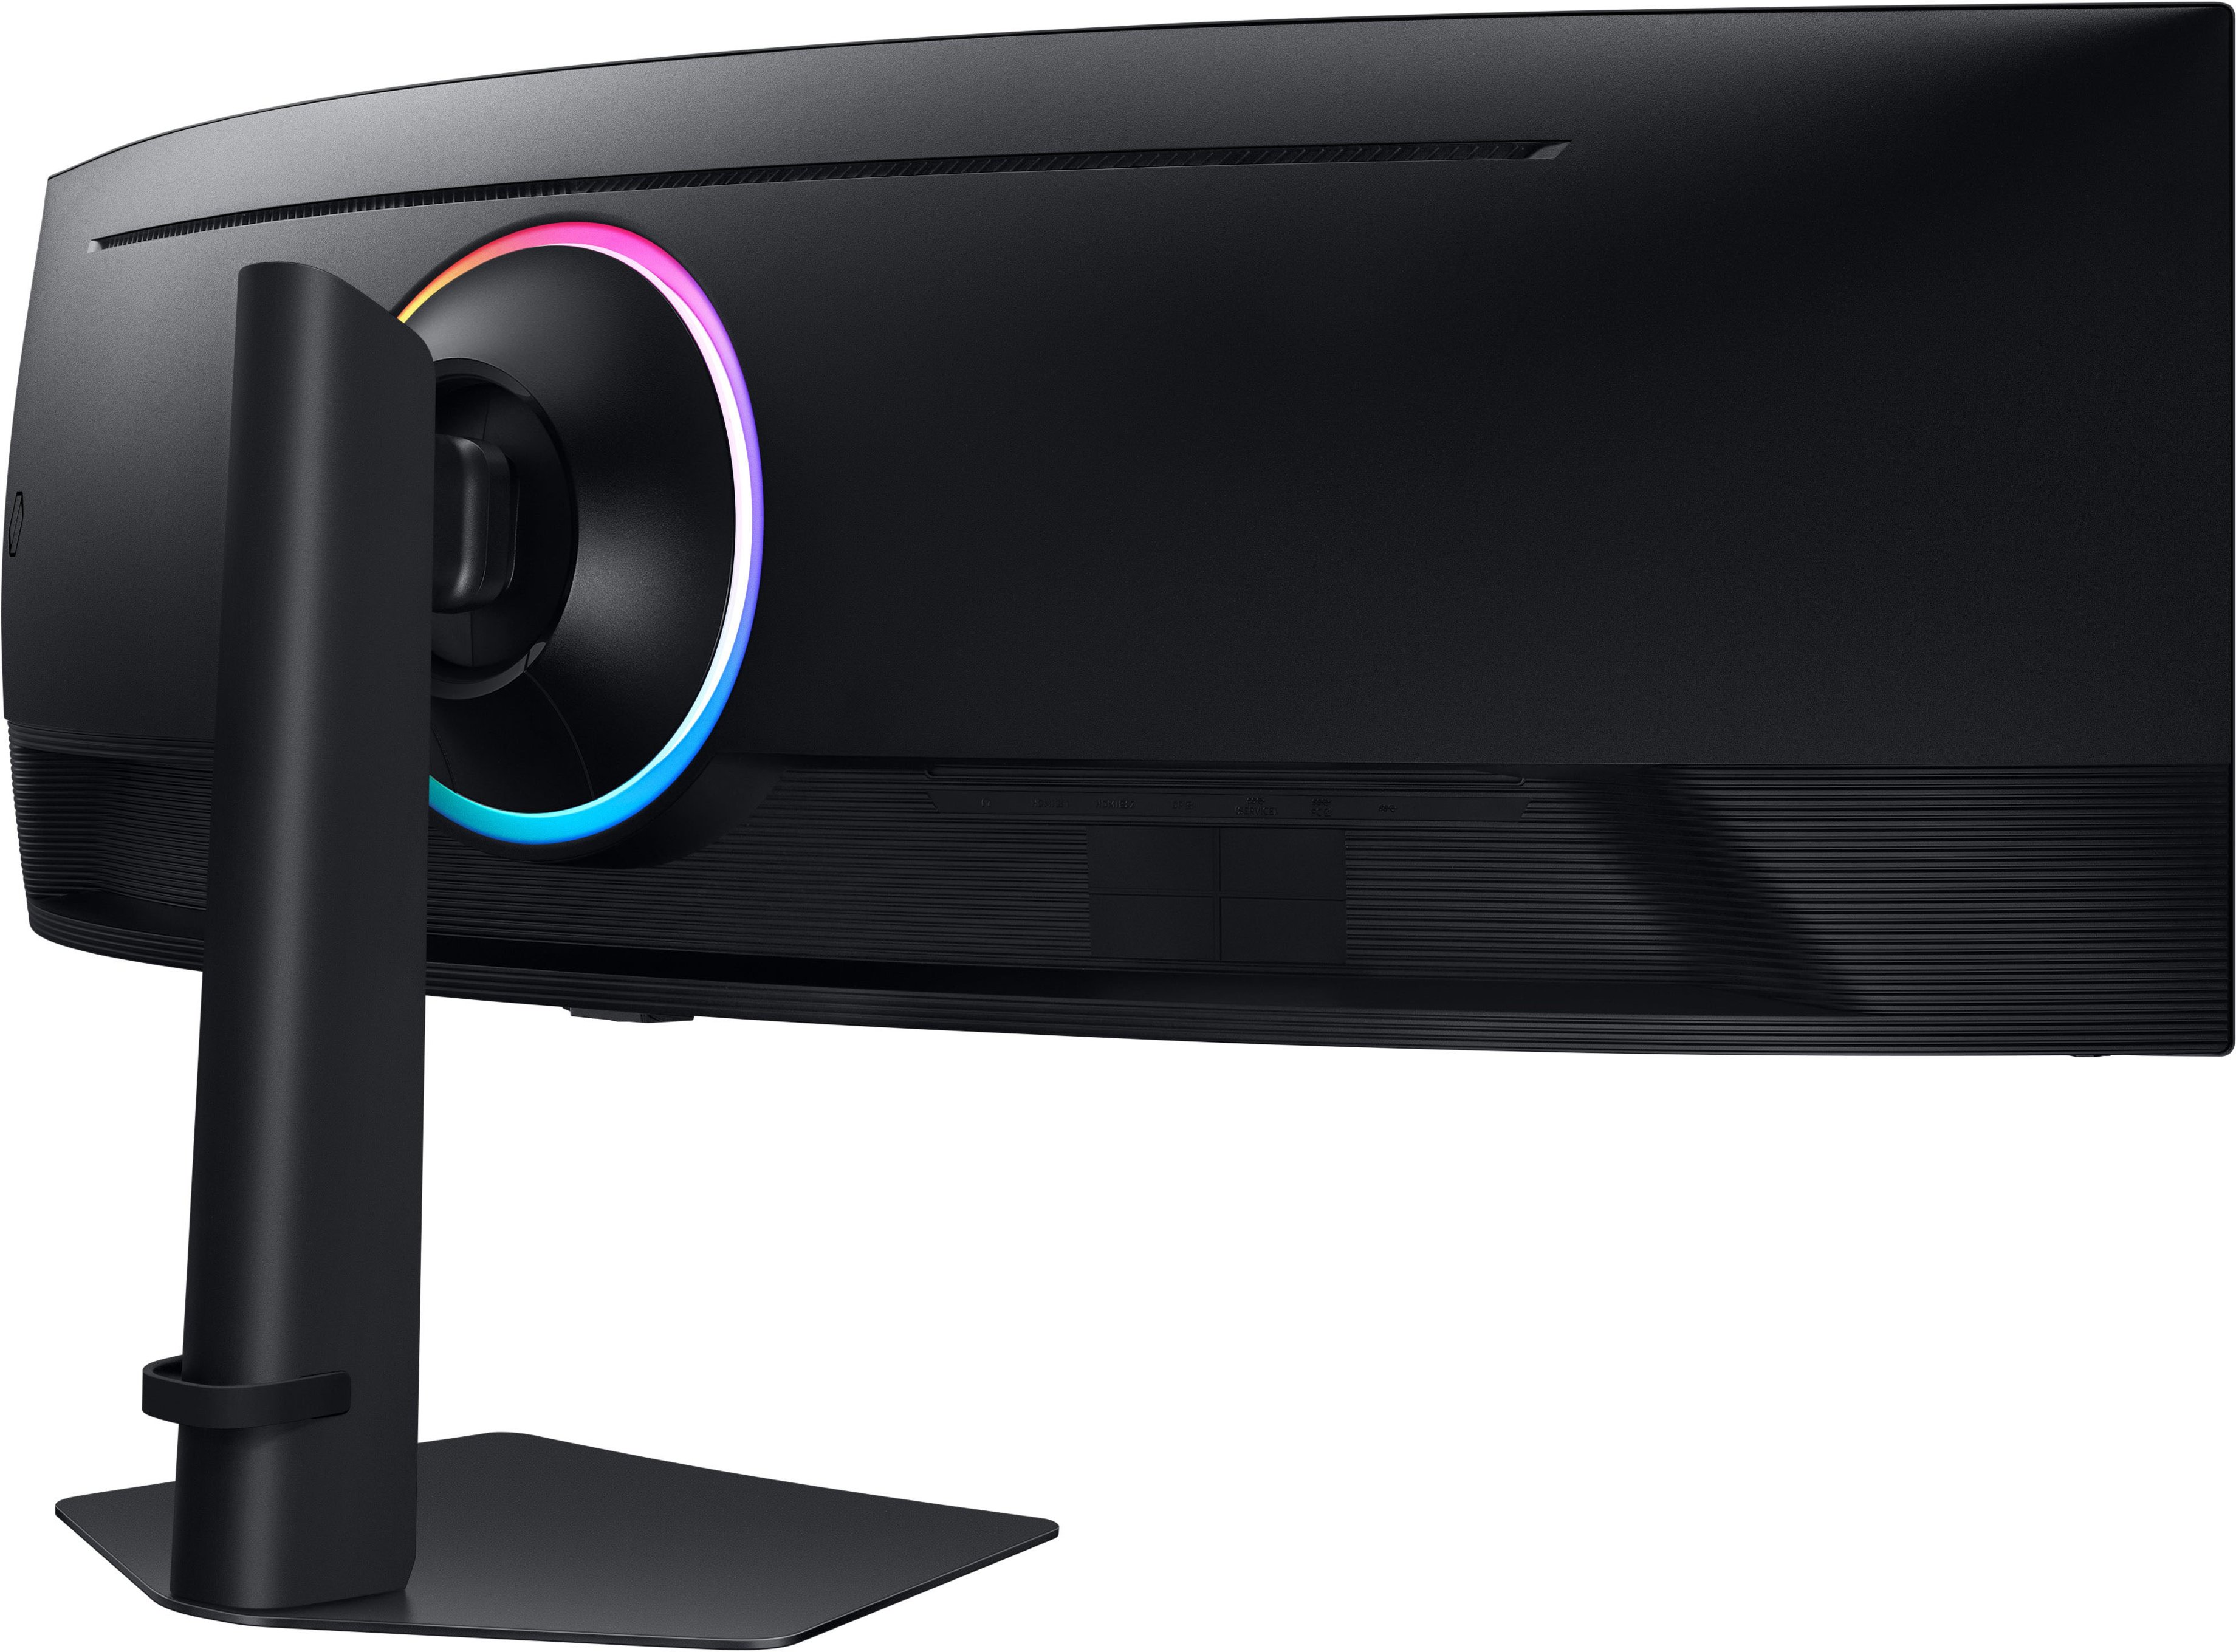 Samsung's Odyssey Continues: Ultra-Curved QLED 49-Inch 240 Hz HDR1000  Monitor w/ Adaptive Sync